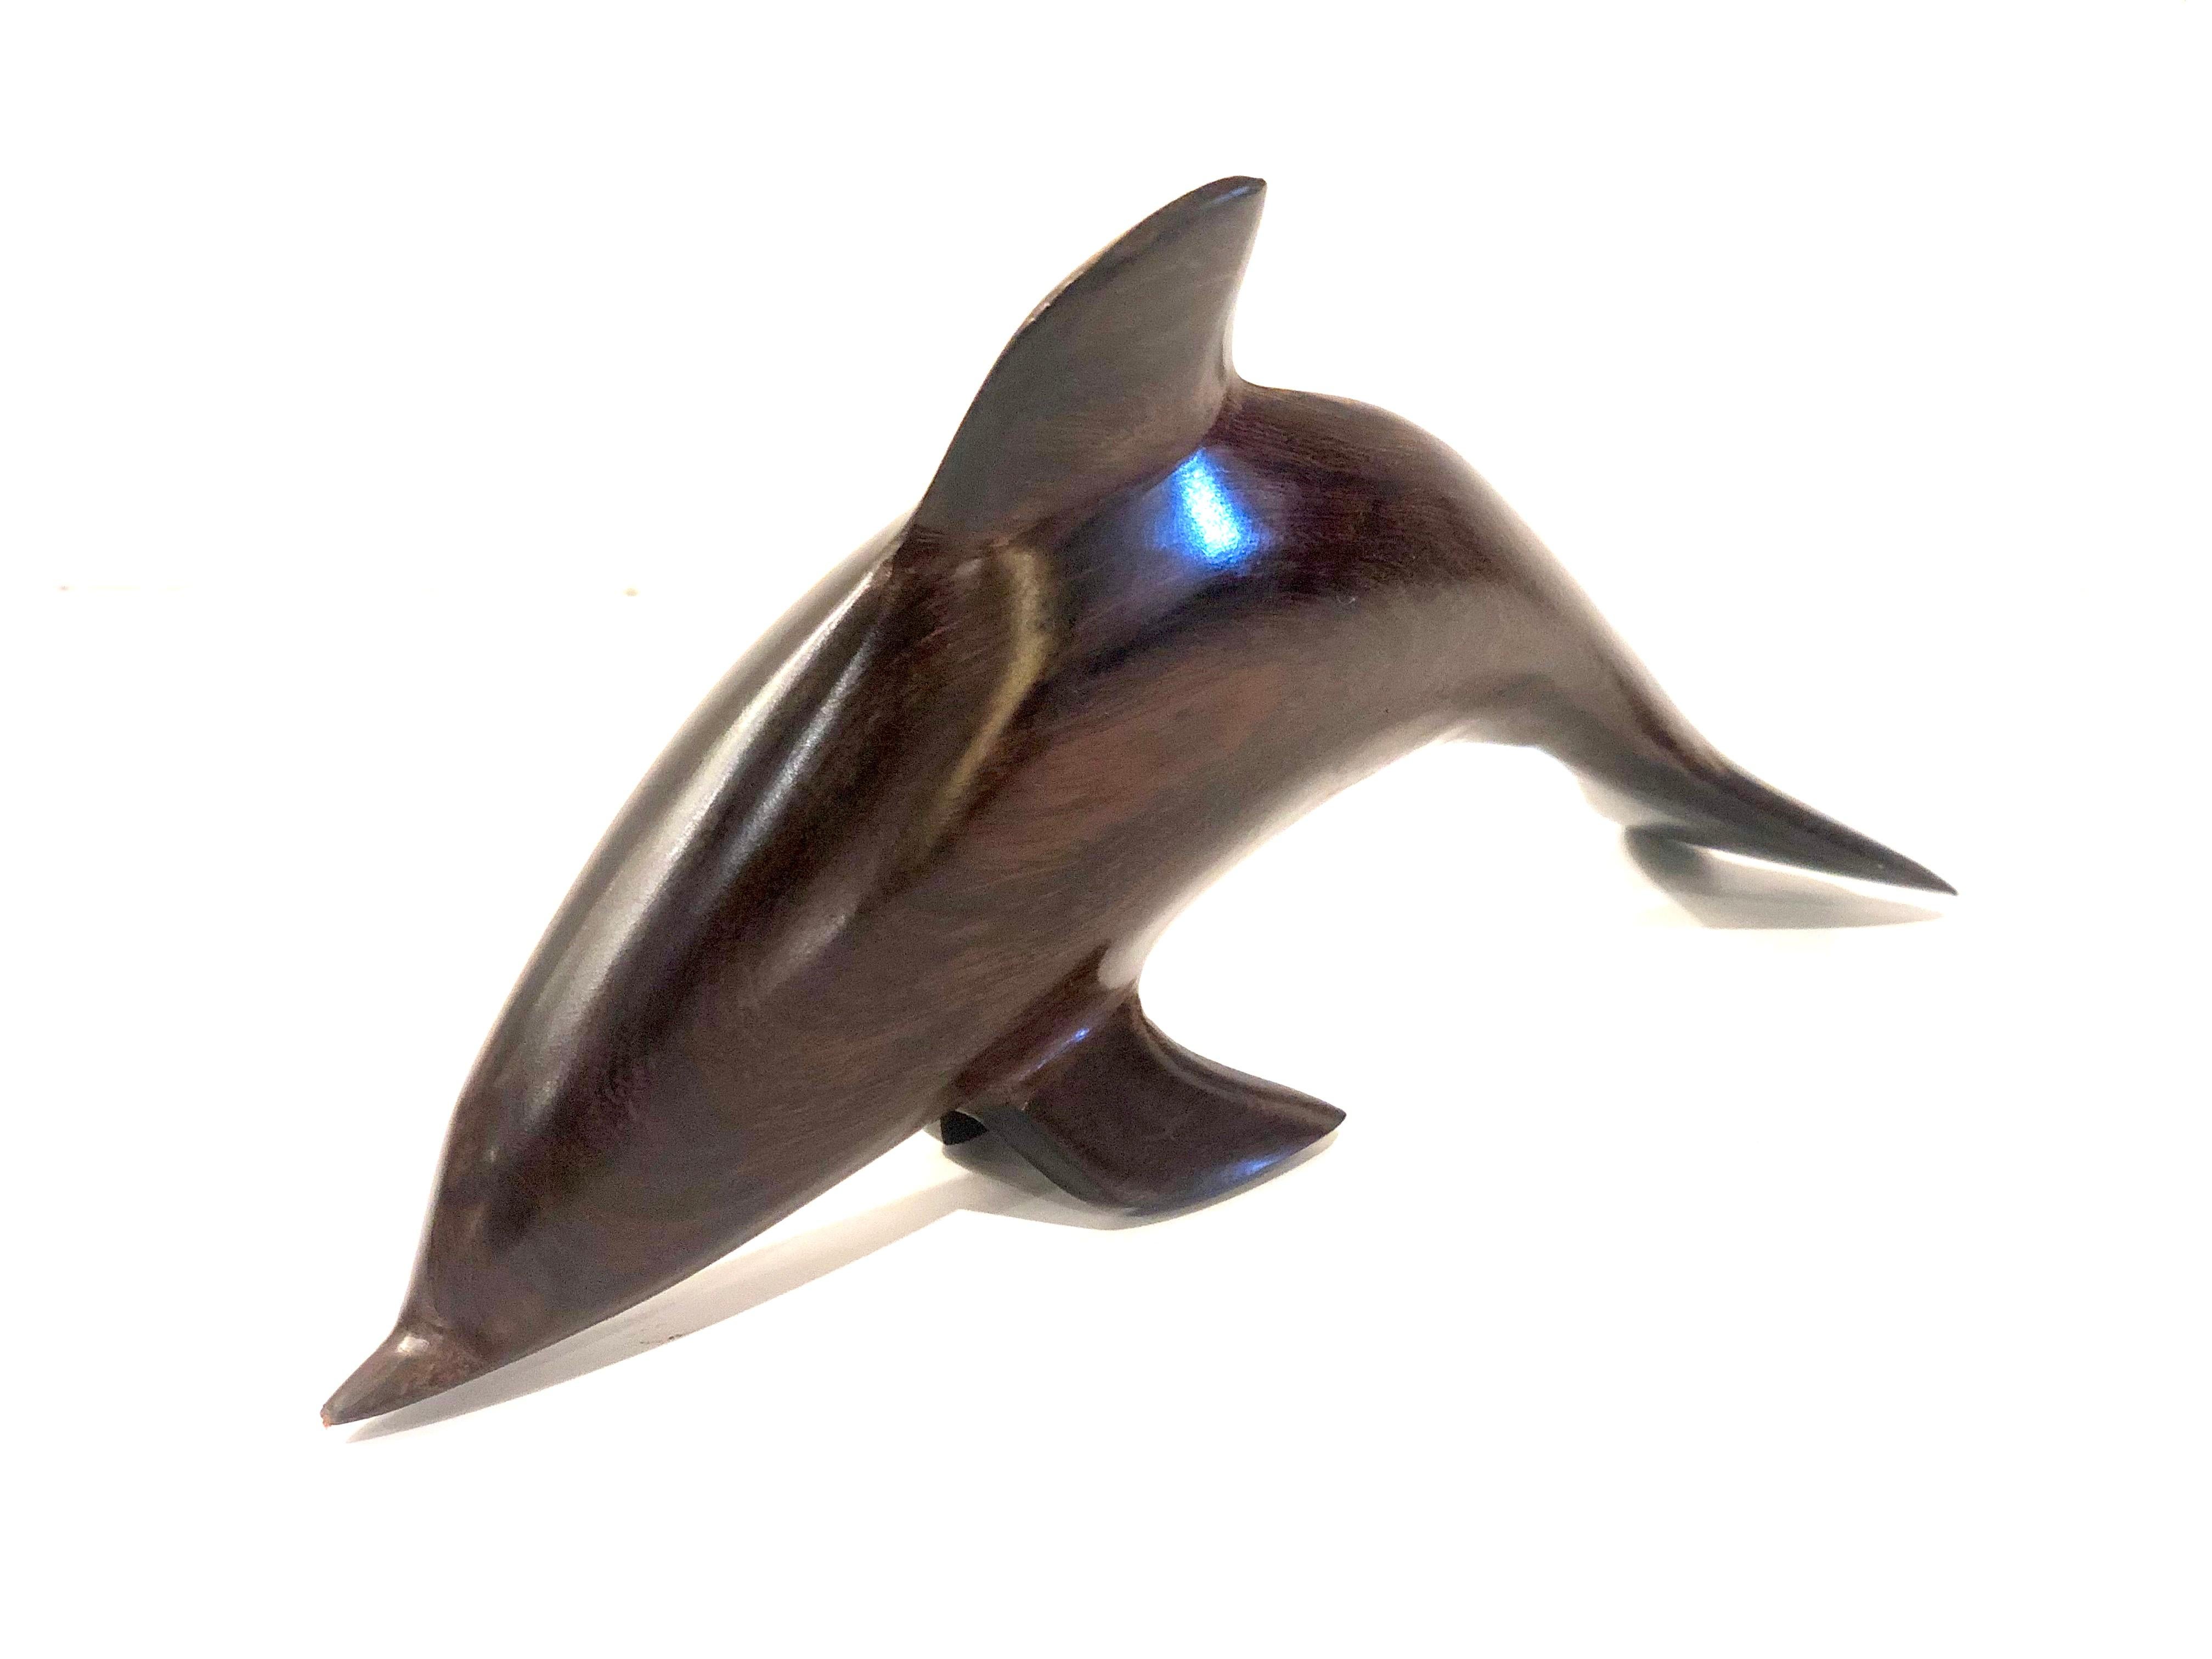 Beautiful solid rosewood handcrafted dolphin sculpture, circa 1970s nice condition and finish.